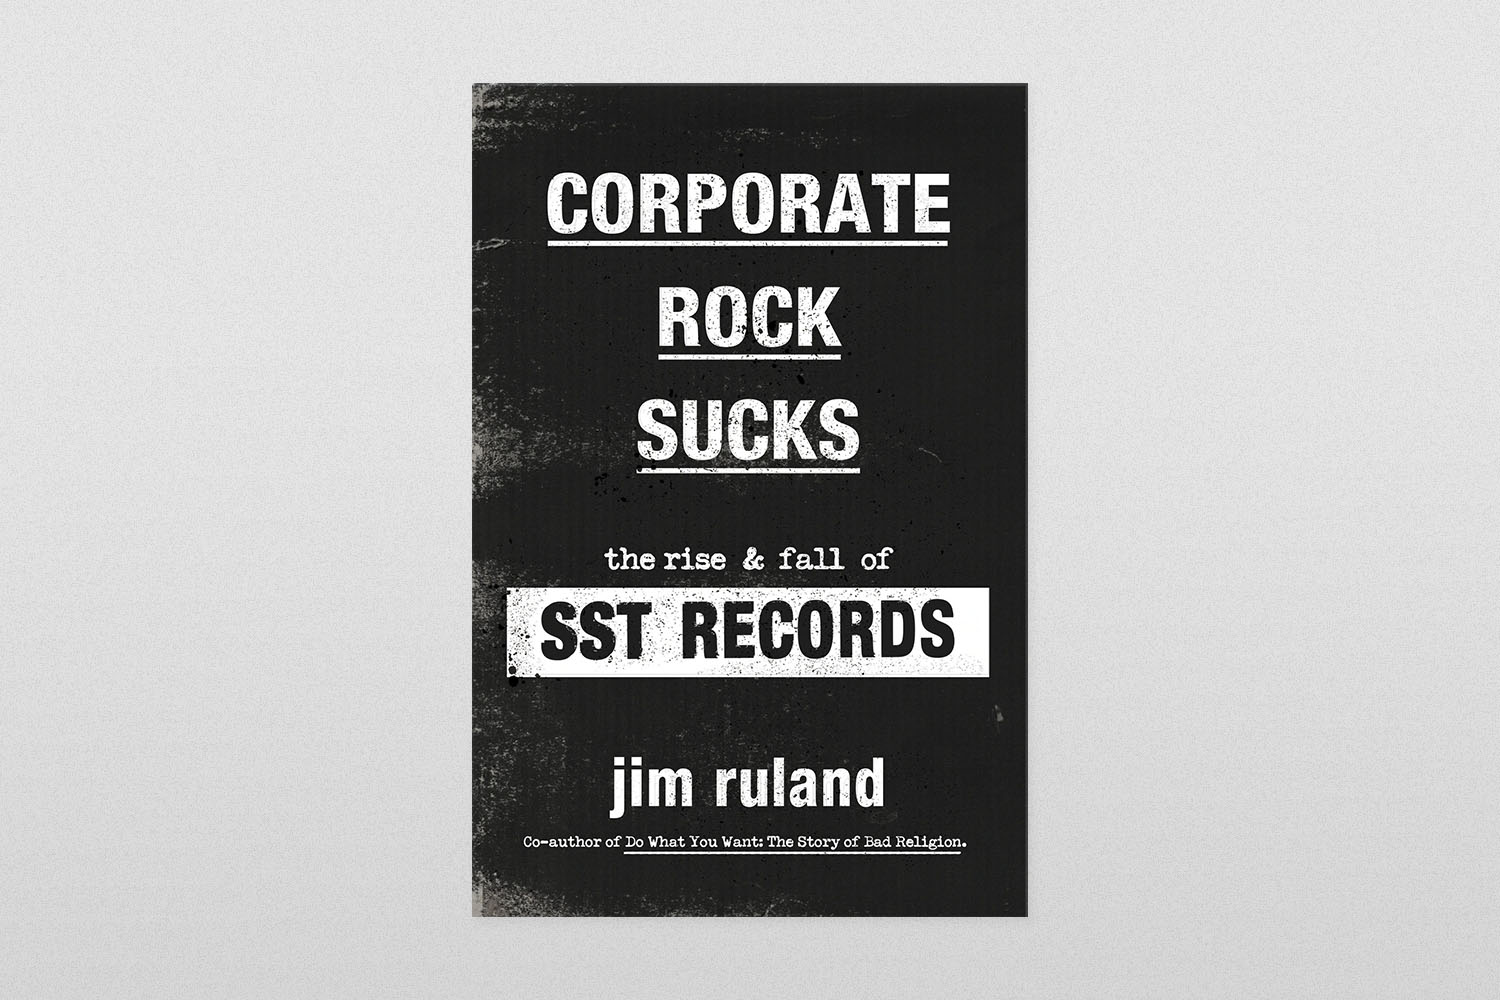 Corporate Rock Sucks- The Rise and Fall of Sst Records by Jim Ruland